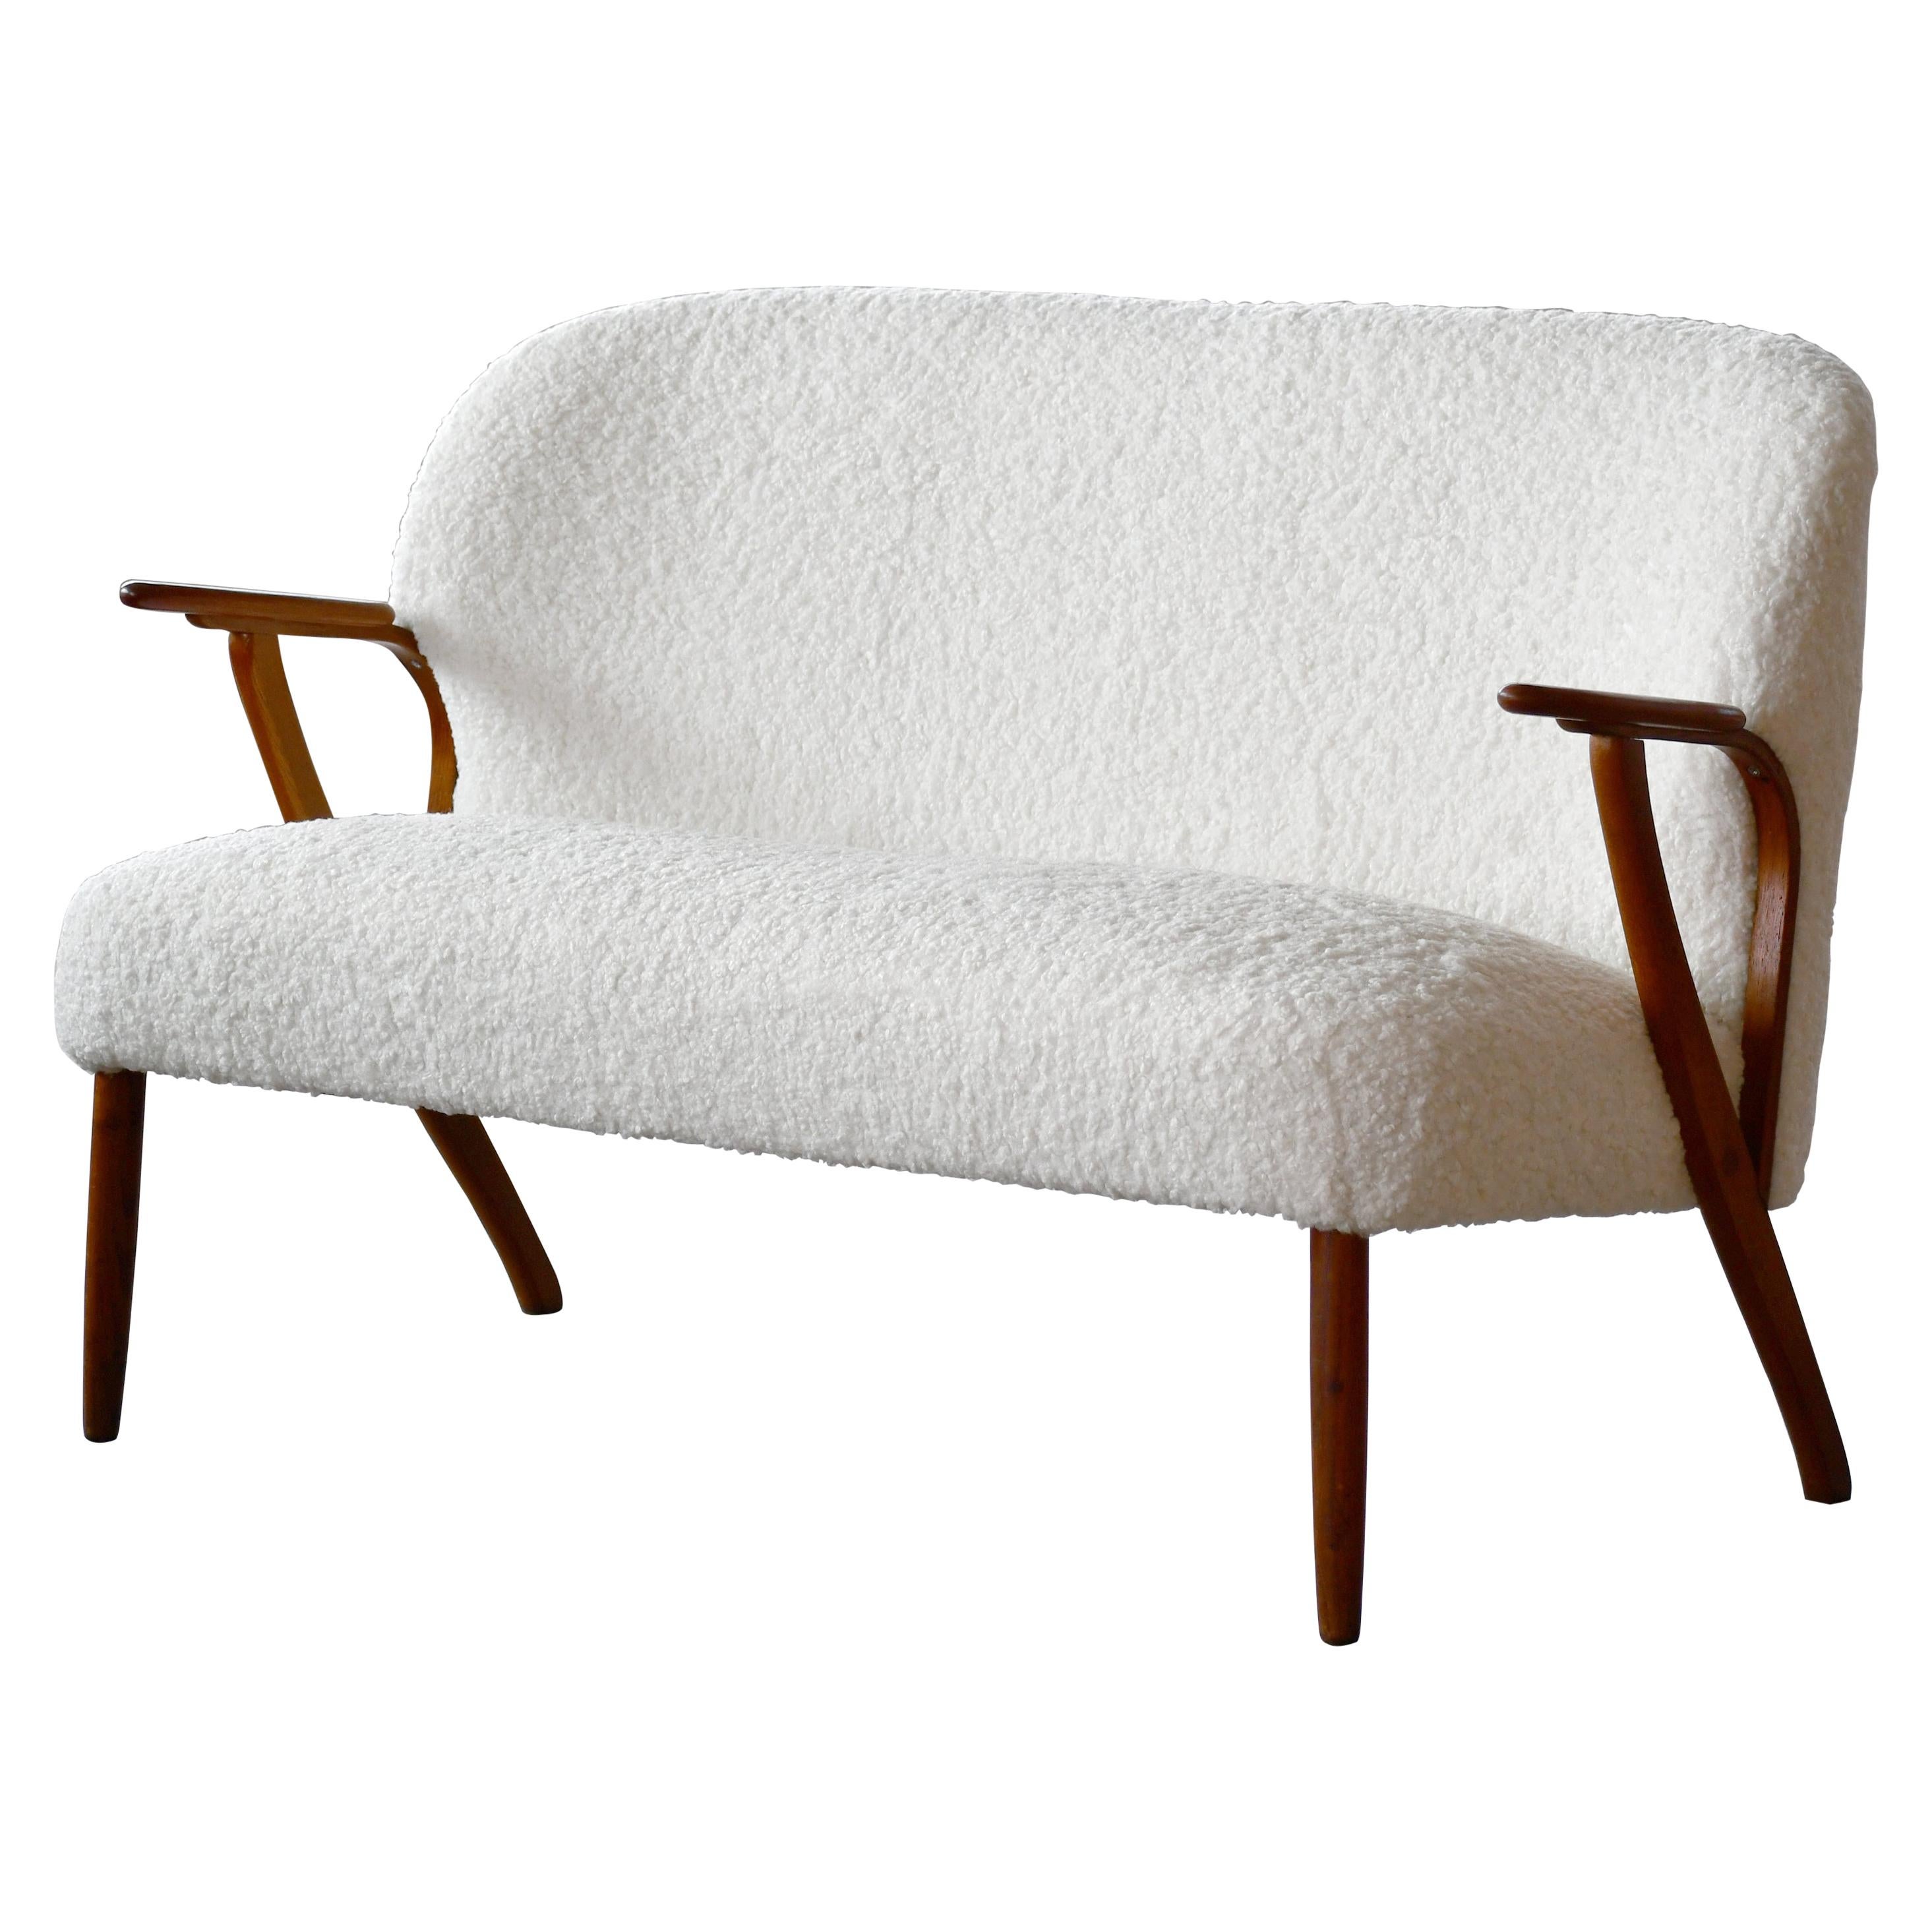 Danish 1950s Midcentury Settee in Teak and White Boucle Newly Upholstered